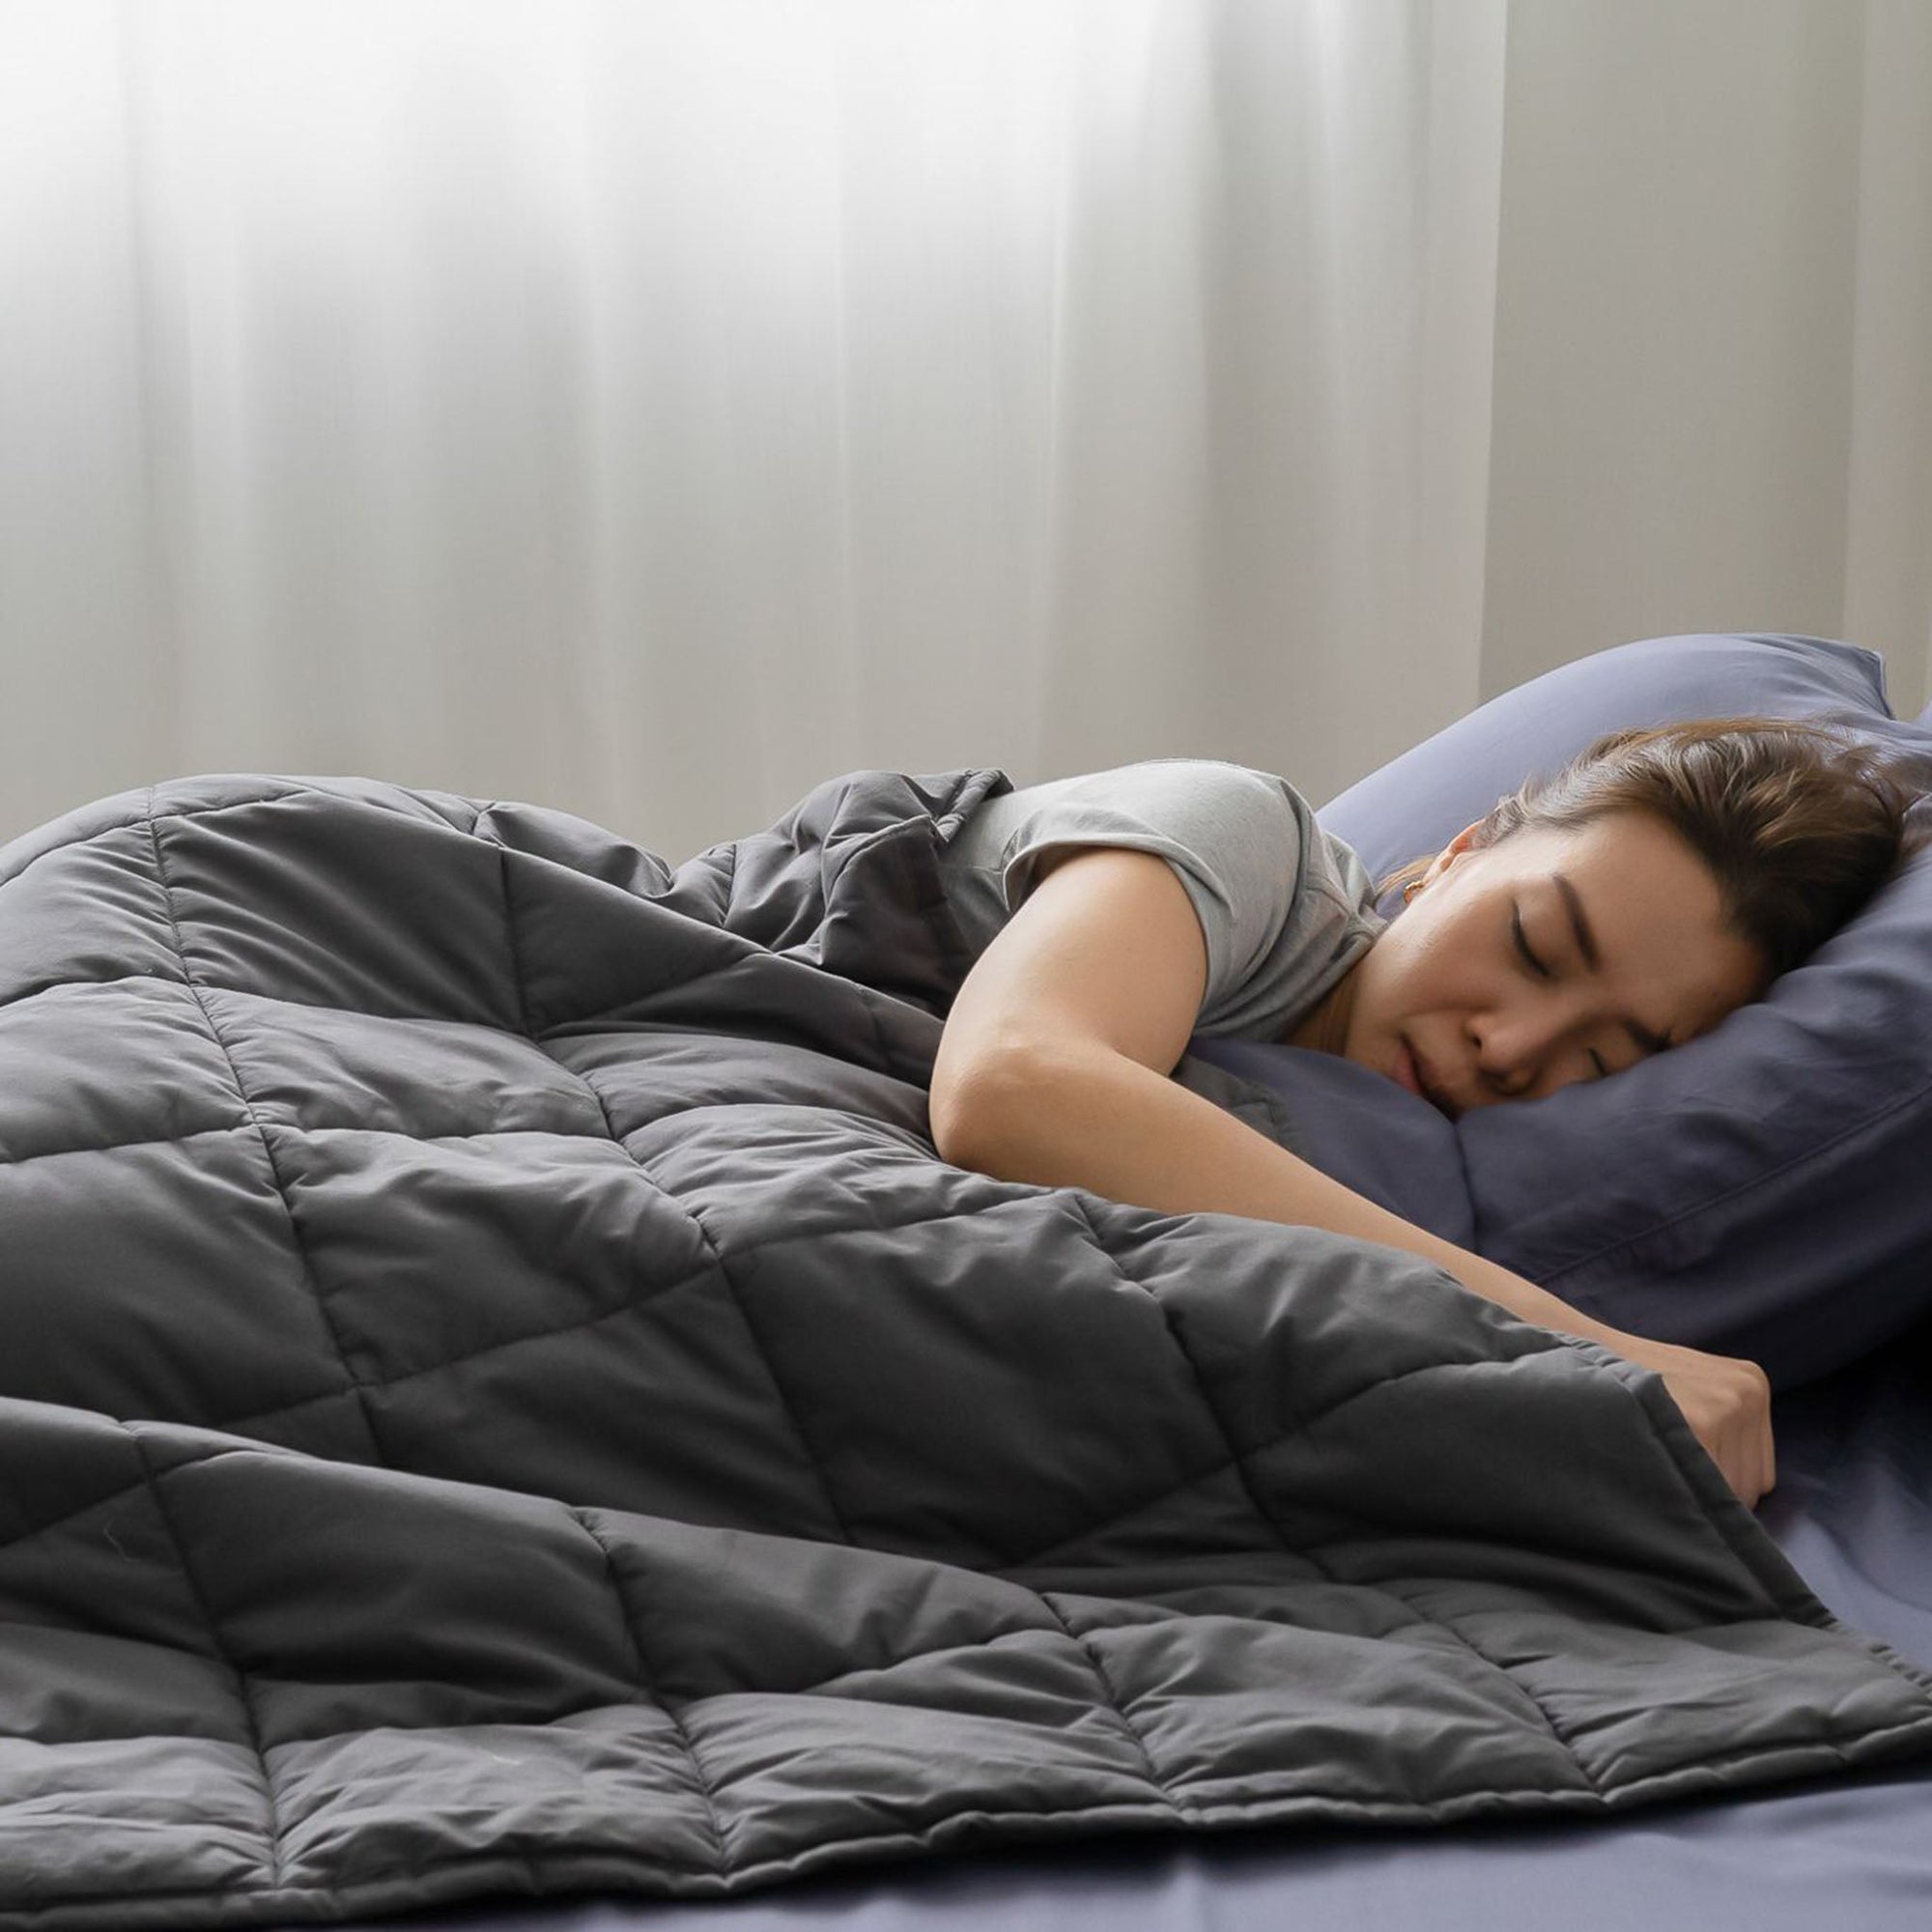 Weavve Home Weighted Blanket Singapore Gravity Blanket Singapore benefits and helps with anxiety and insomnia 